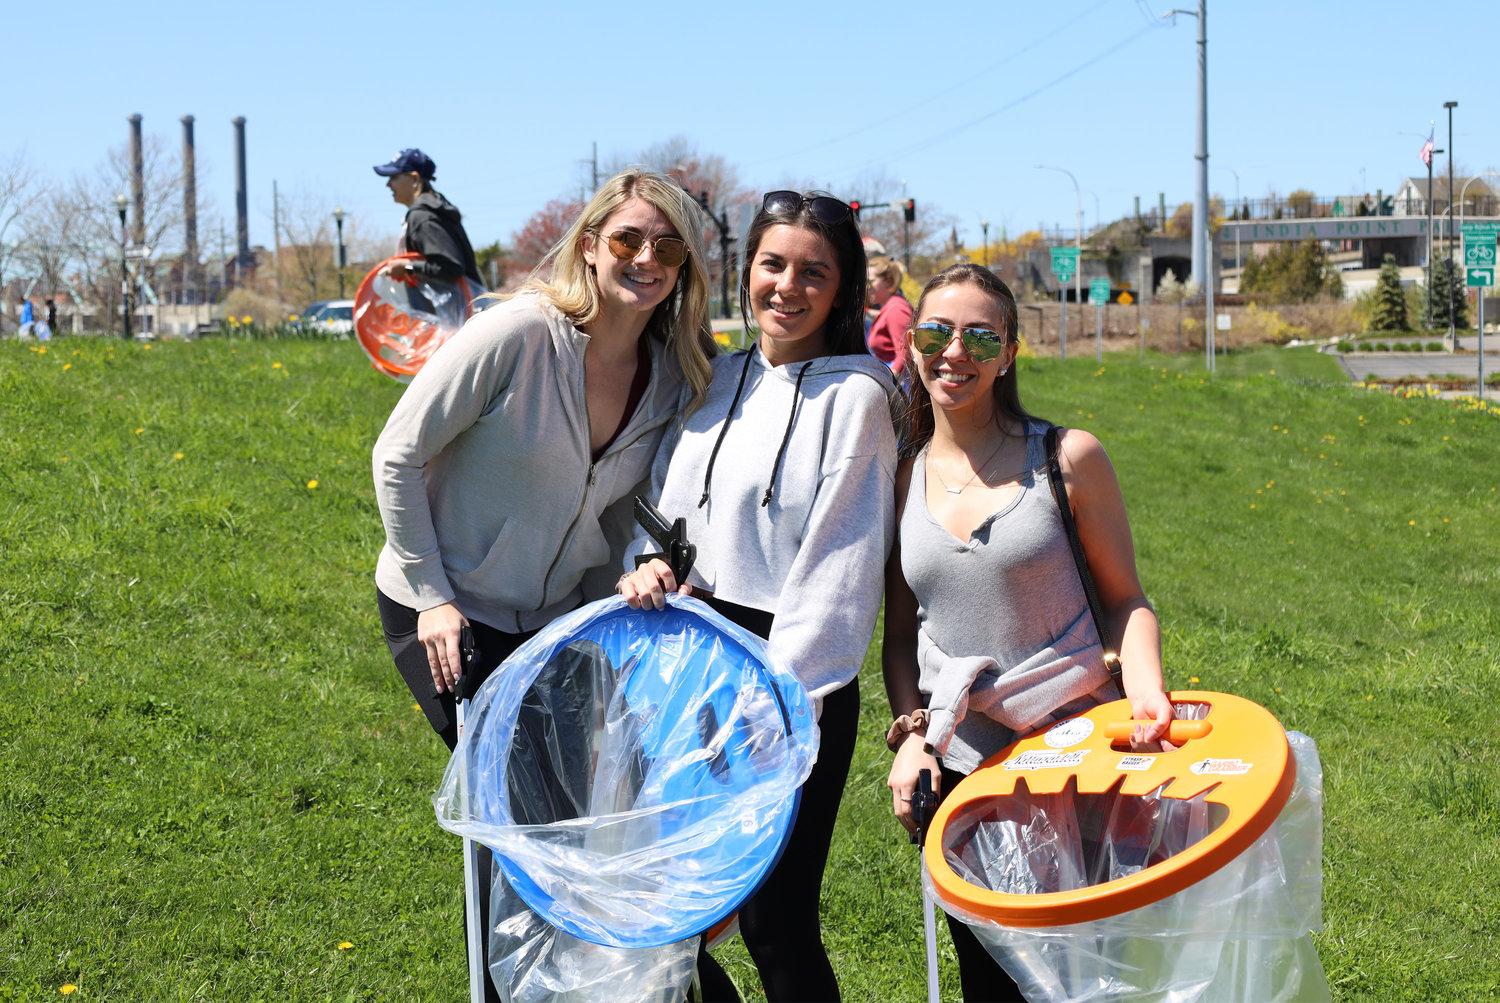 More than 100 FPNA neighbors participated in a litter cleanup in India Point Park over Earth Day weekend